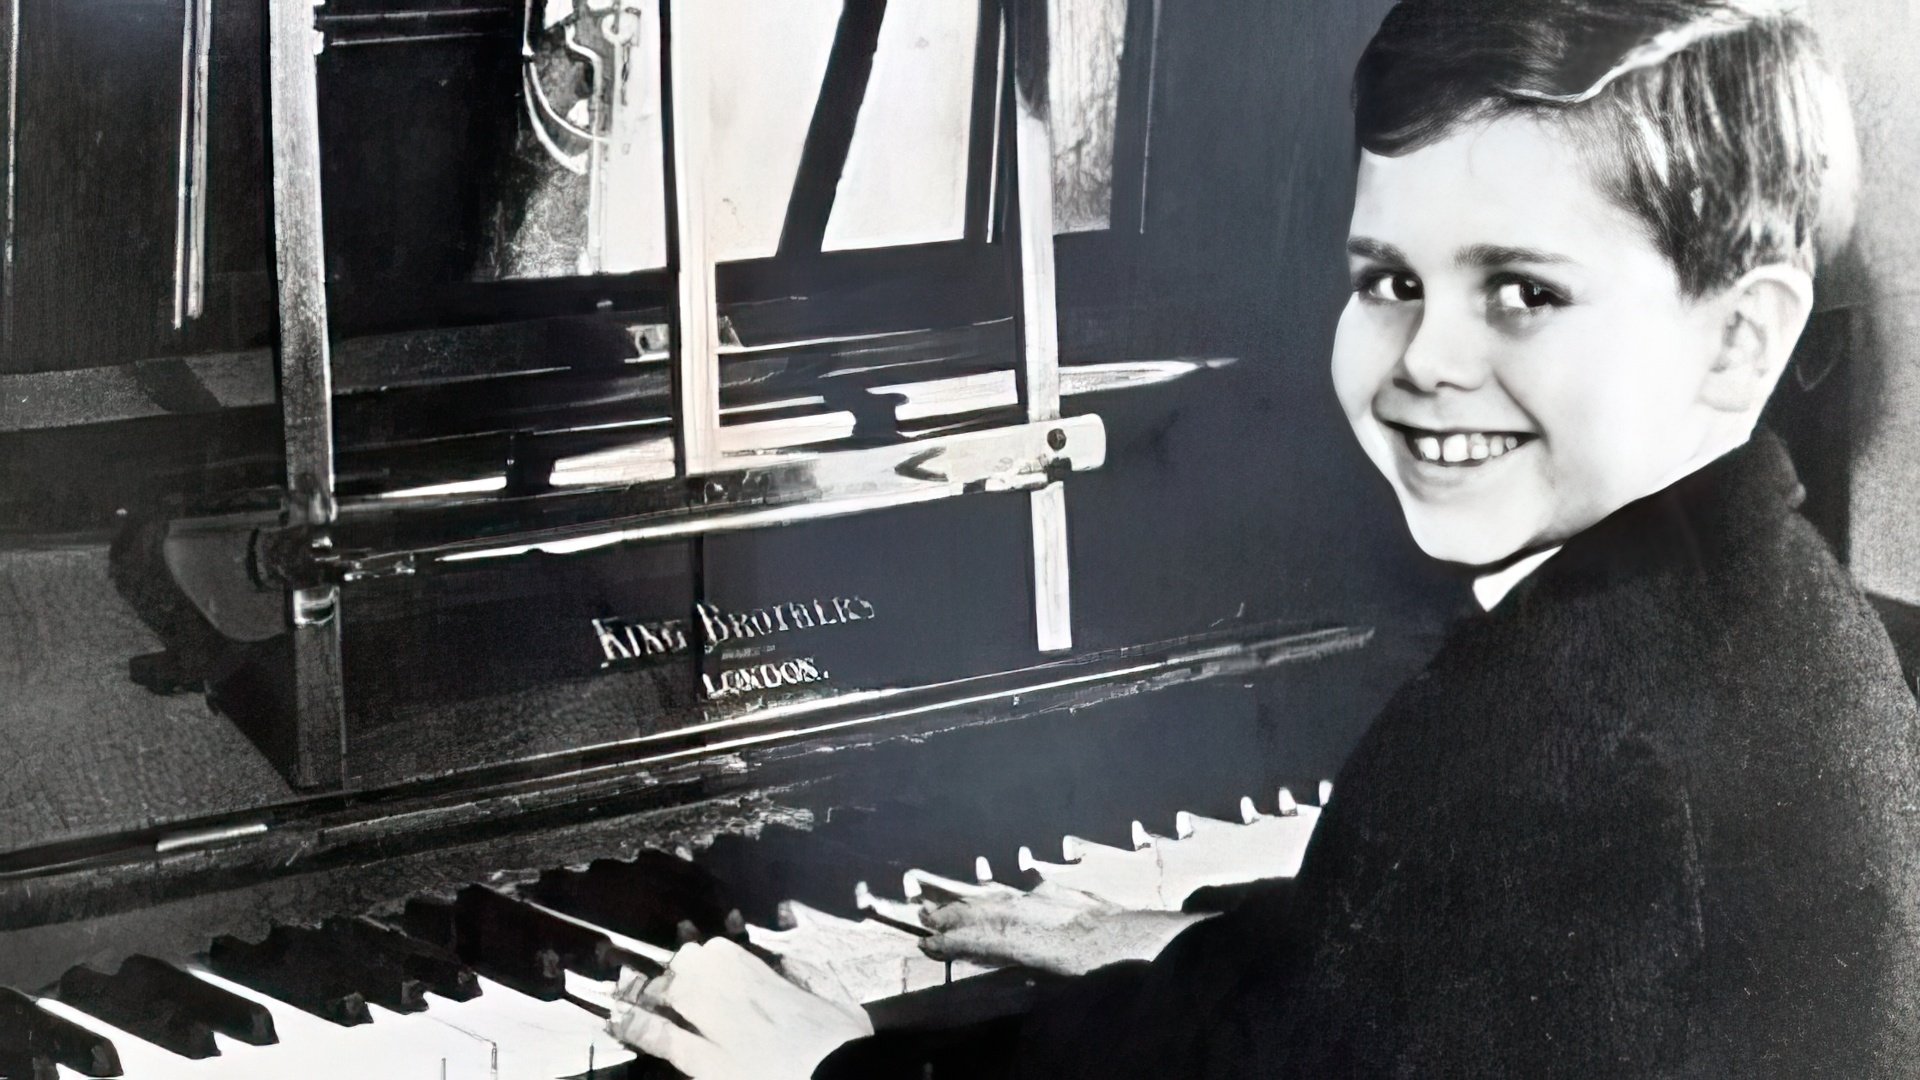 At the age of 11 Elton John entered the Royal Academy of Music